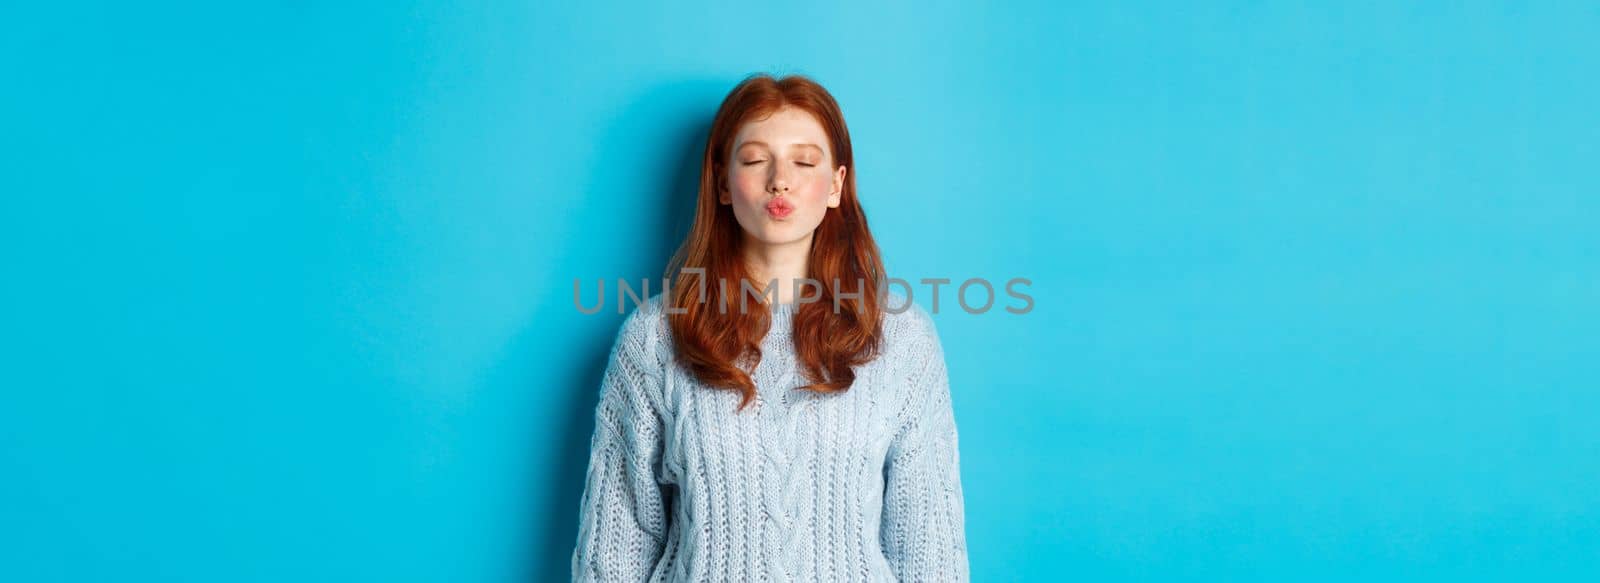 Cute redhead teen girl waiting for kiss, pucker lips and close eyes, standing in sweater against blue background.